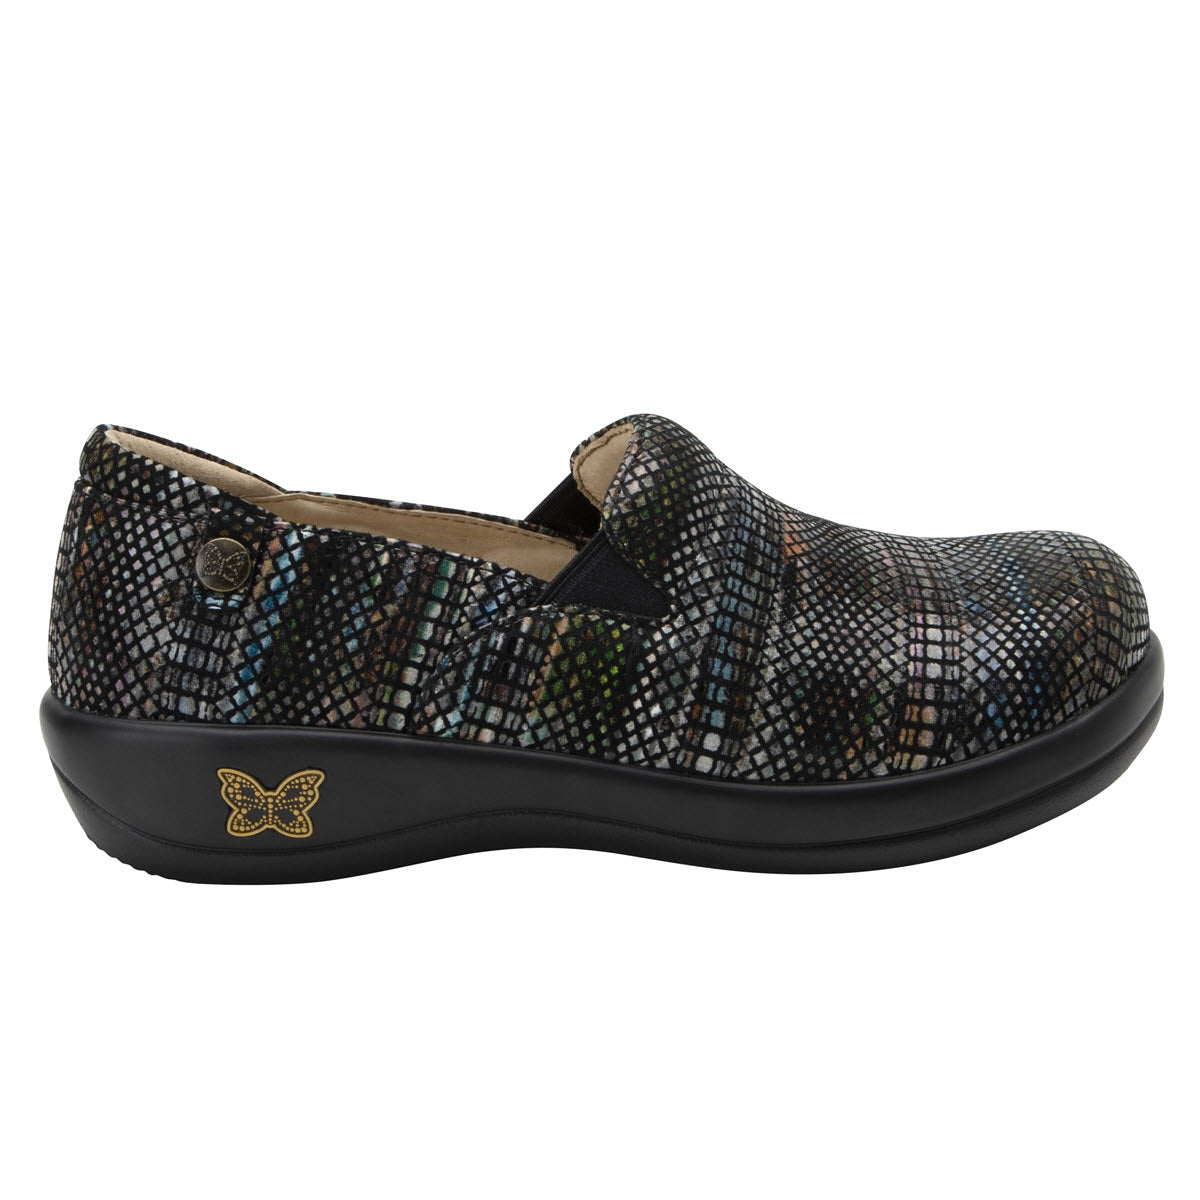 A patterned slip-on shoe with a butterfly emblem on the side and an Alegria footbed for enhanced comfort. (Replace with: ALEGRIA KELI EARTHY LUX - WOMENS by Alegria)